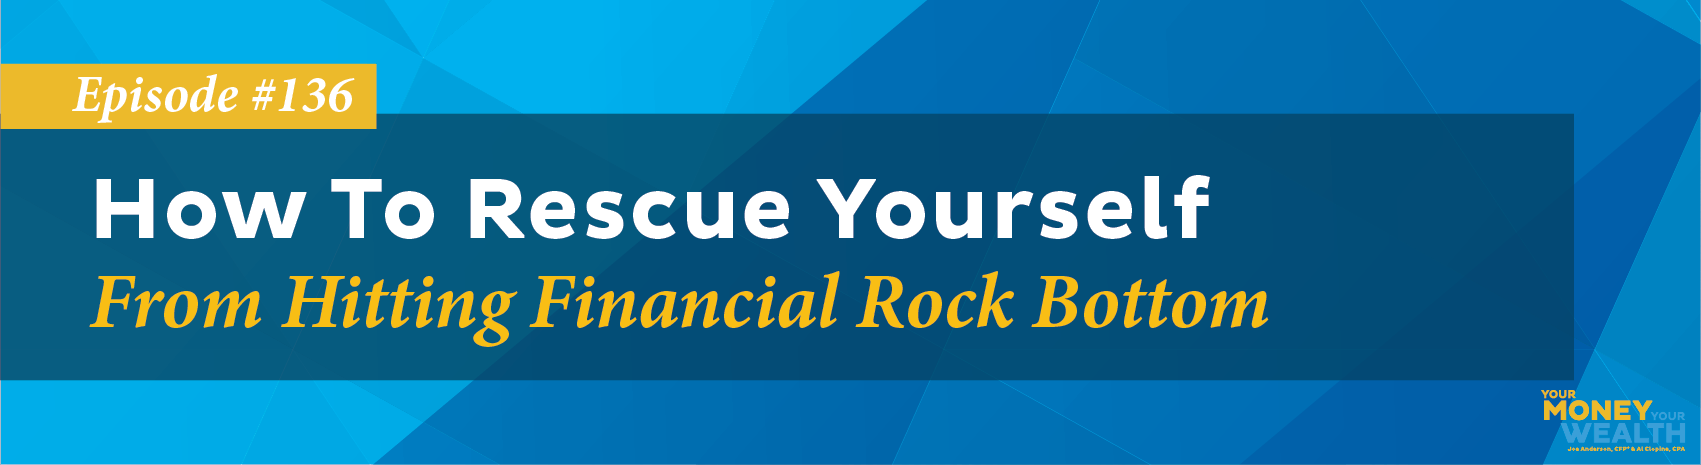 How To Rescue Yourself From Hitting Financial Rock Bottom